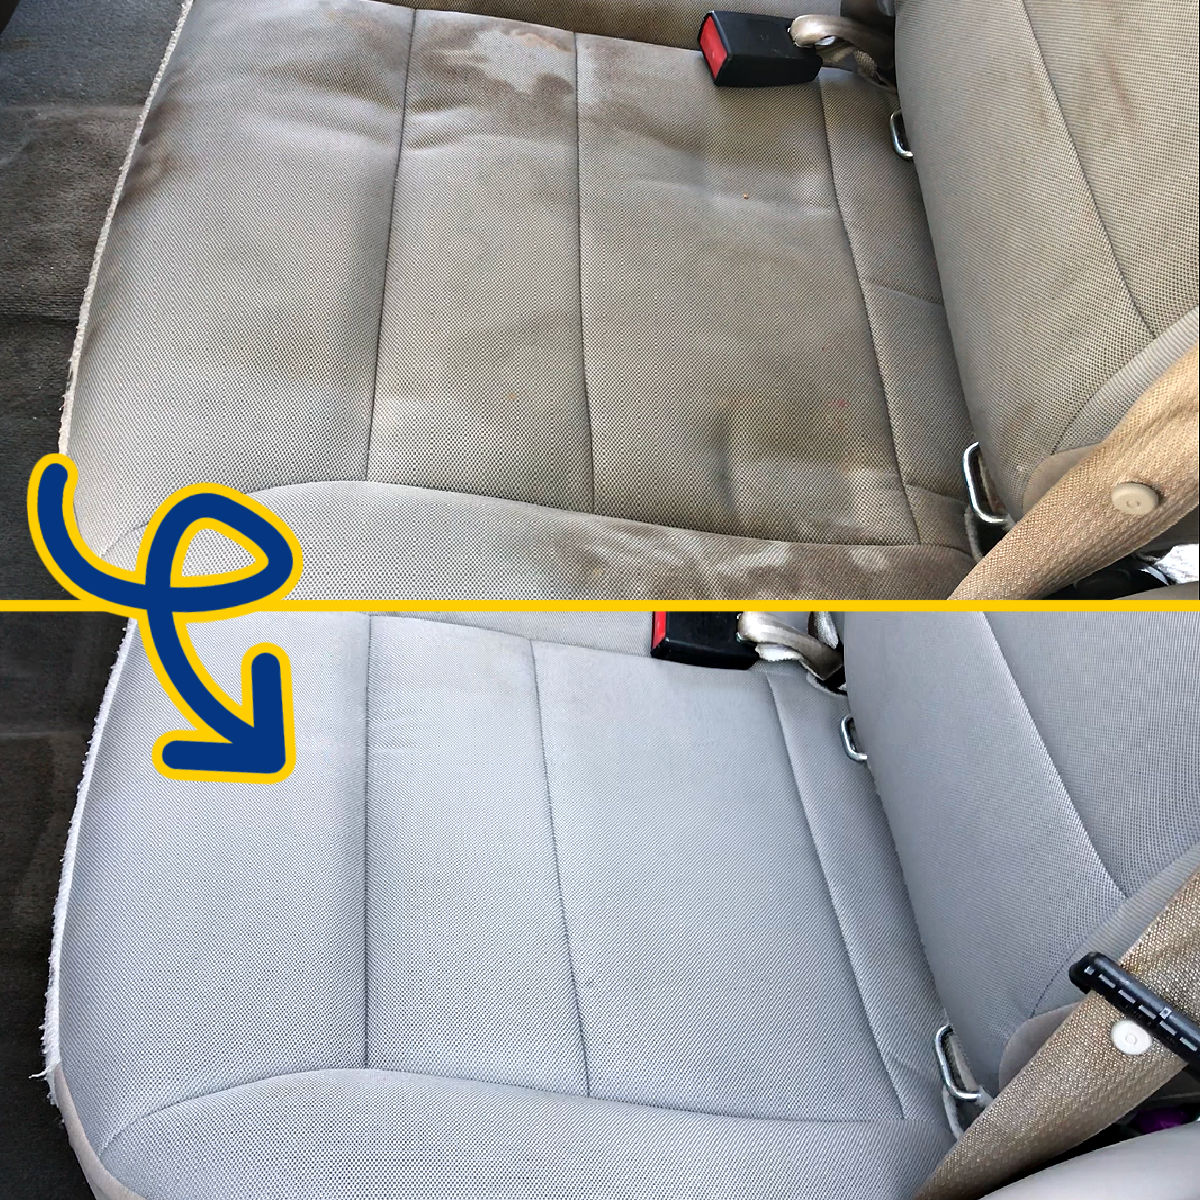 How to Clean Your Car Interior Seats and Carpets Thoroughly: 10 Easy Steps